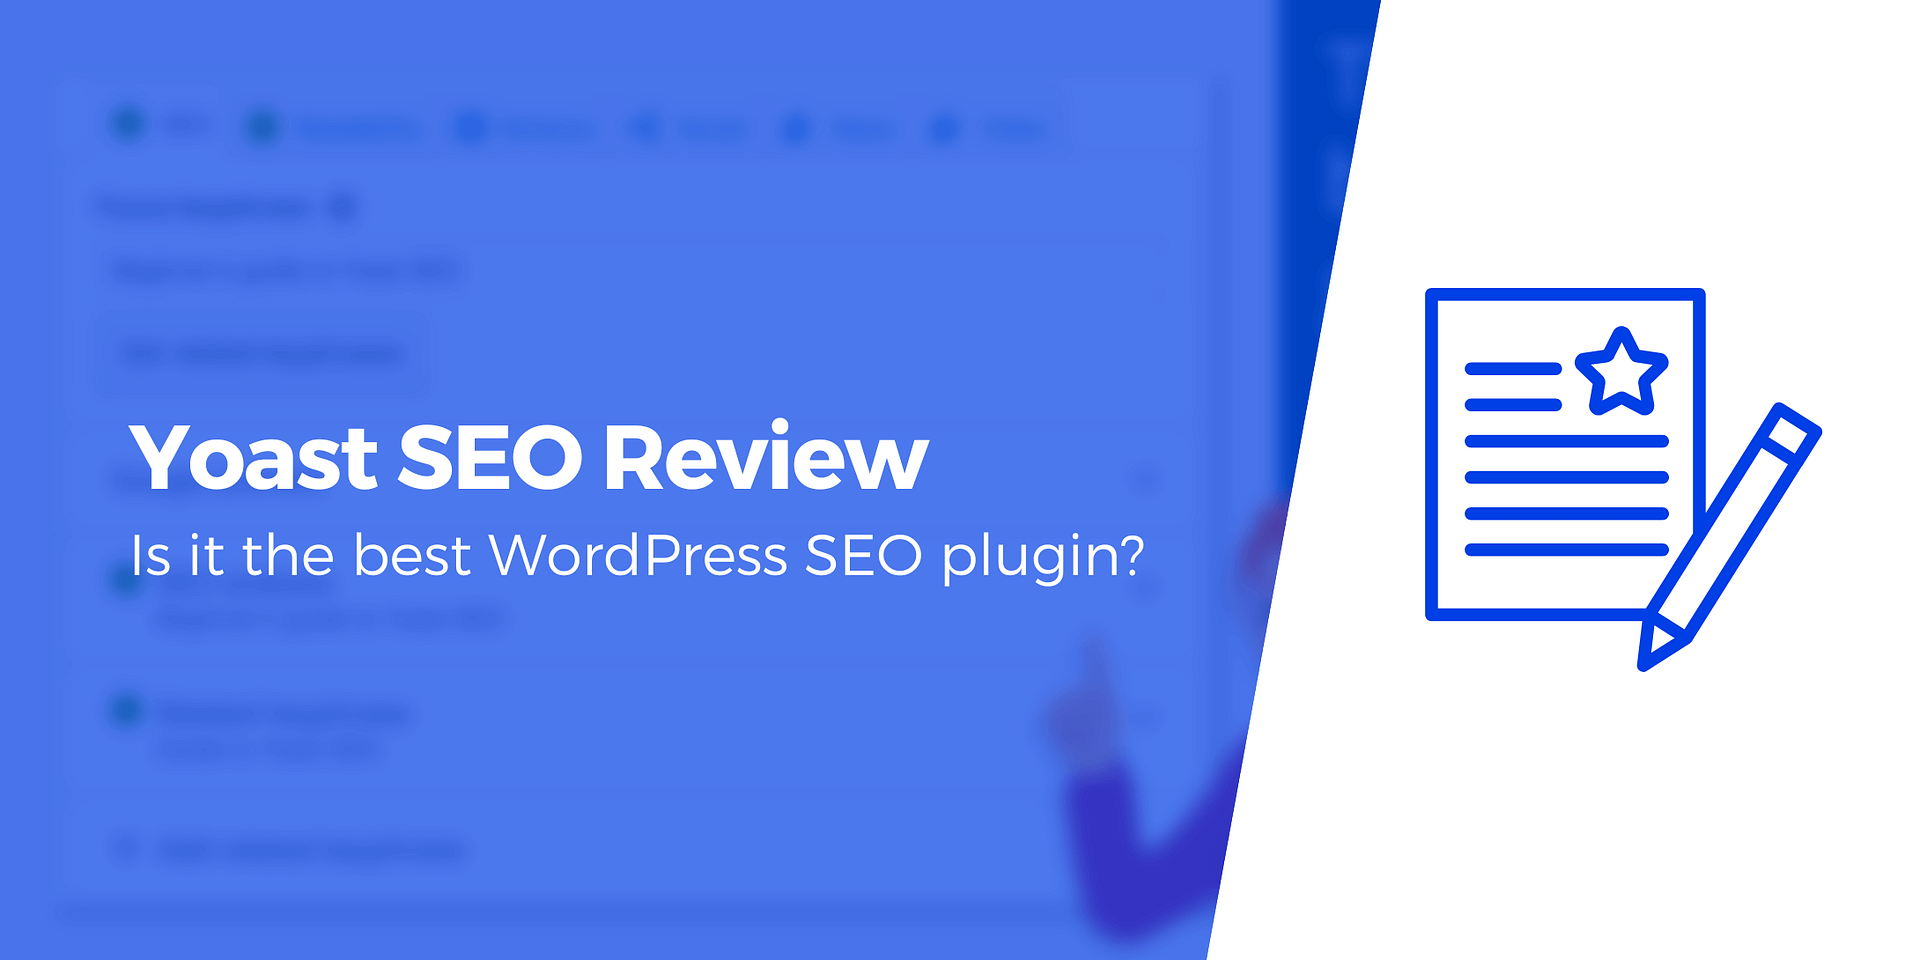 All in One SEO vs Yoast SEO plugin: Which is the #1 SEO Solution?